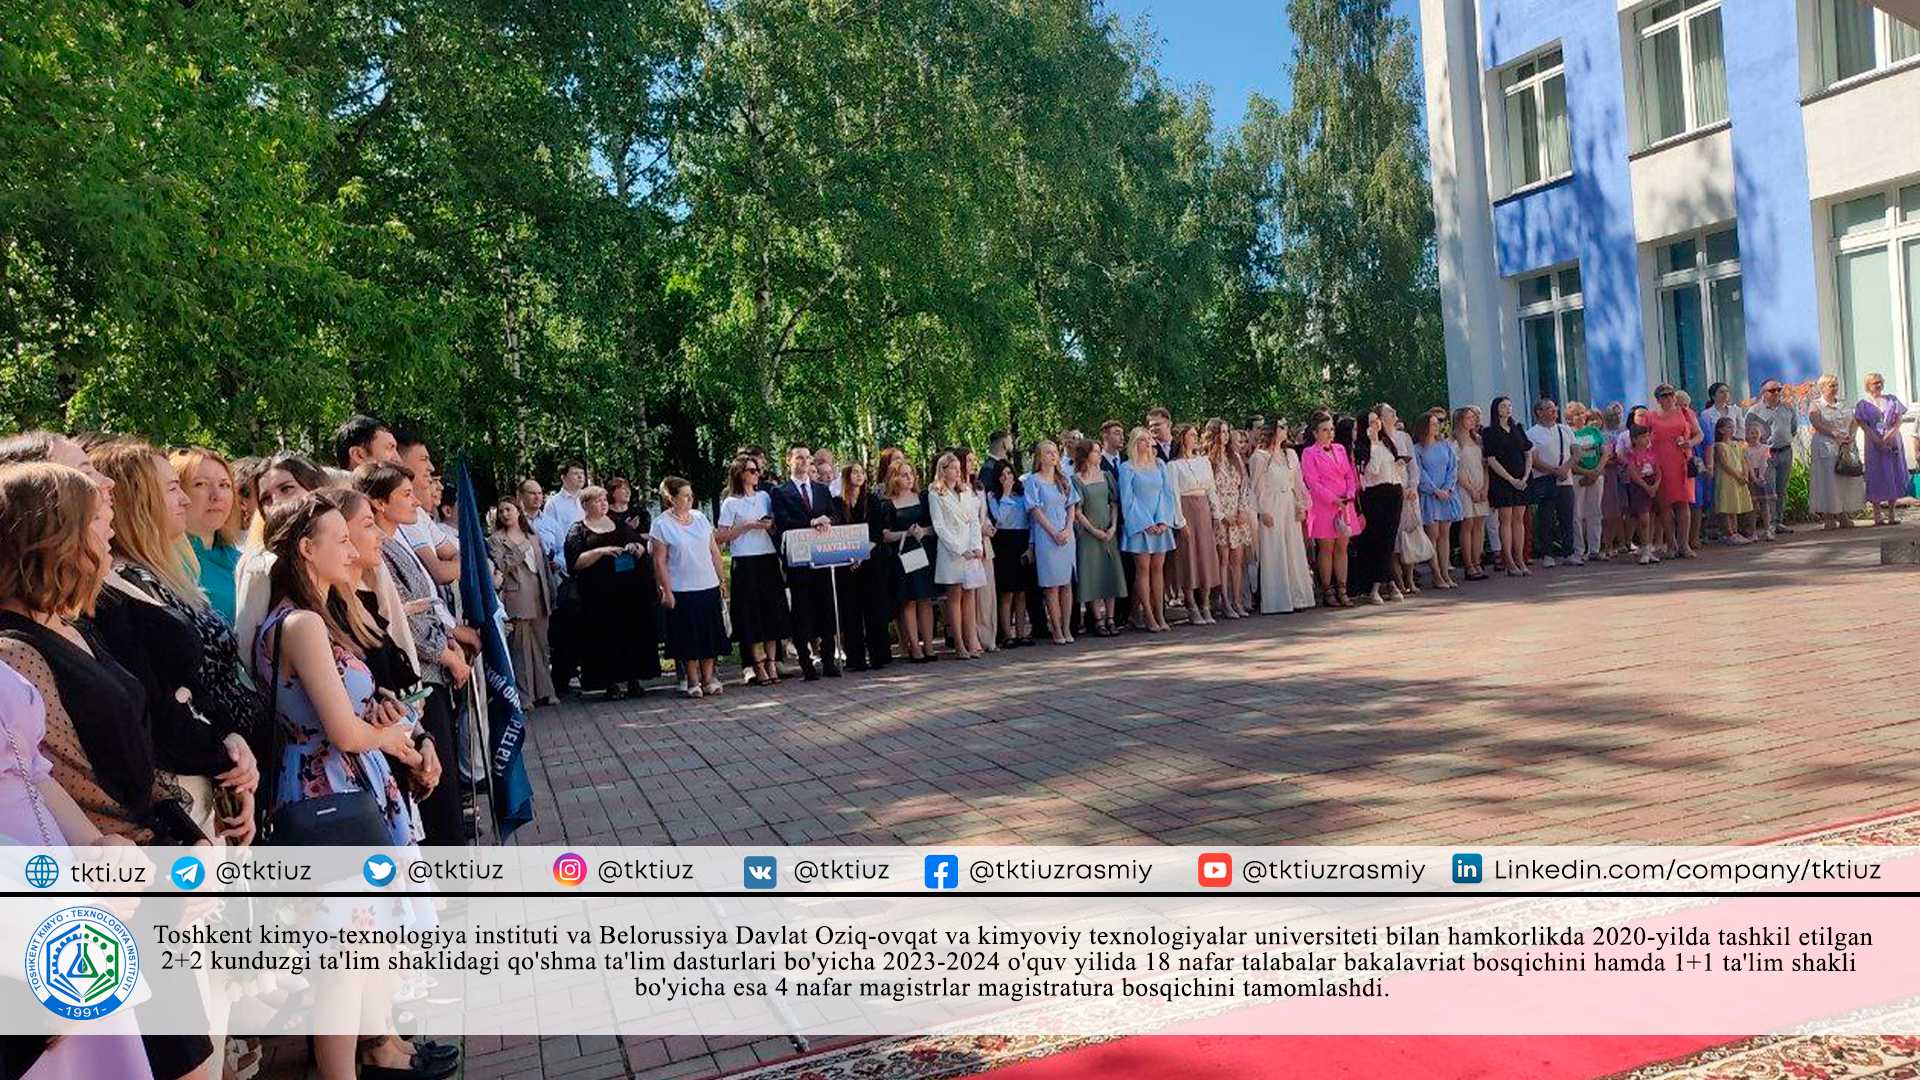 18 students in the academic year 2023-2024 on joint educational programs of 2+2 full-time education, established in 2020 in cooperation with the Tashkent Institute of Chemical Technology and the Belarusian State University of Food and Chemical Technologies 4 masters completed the bachelor's degree and the master's degree according to the 1+1 form of education. | tkti.uz